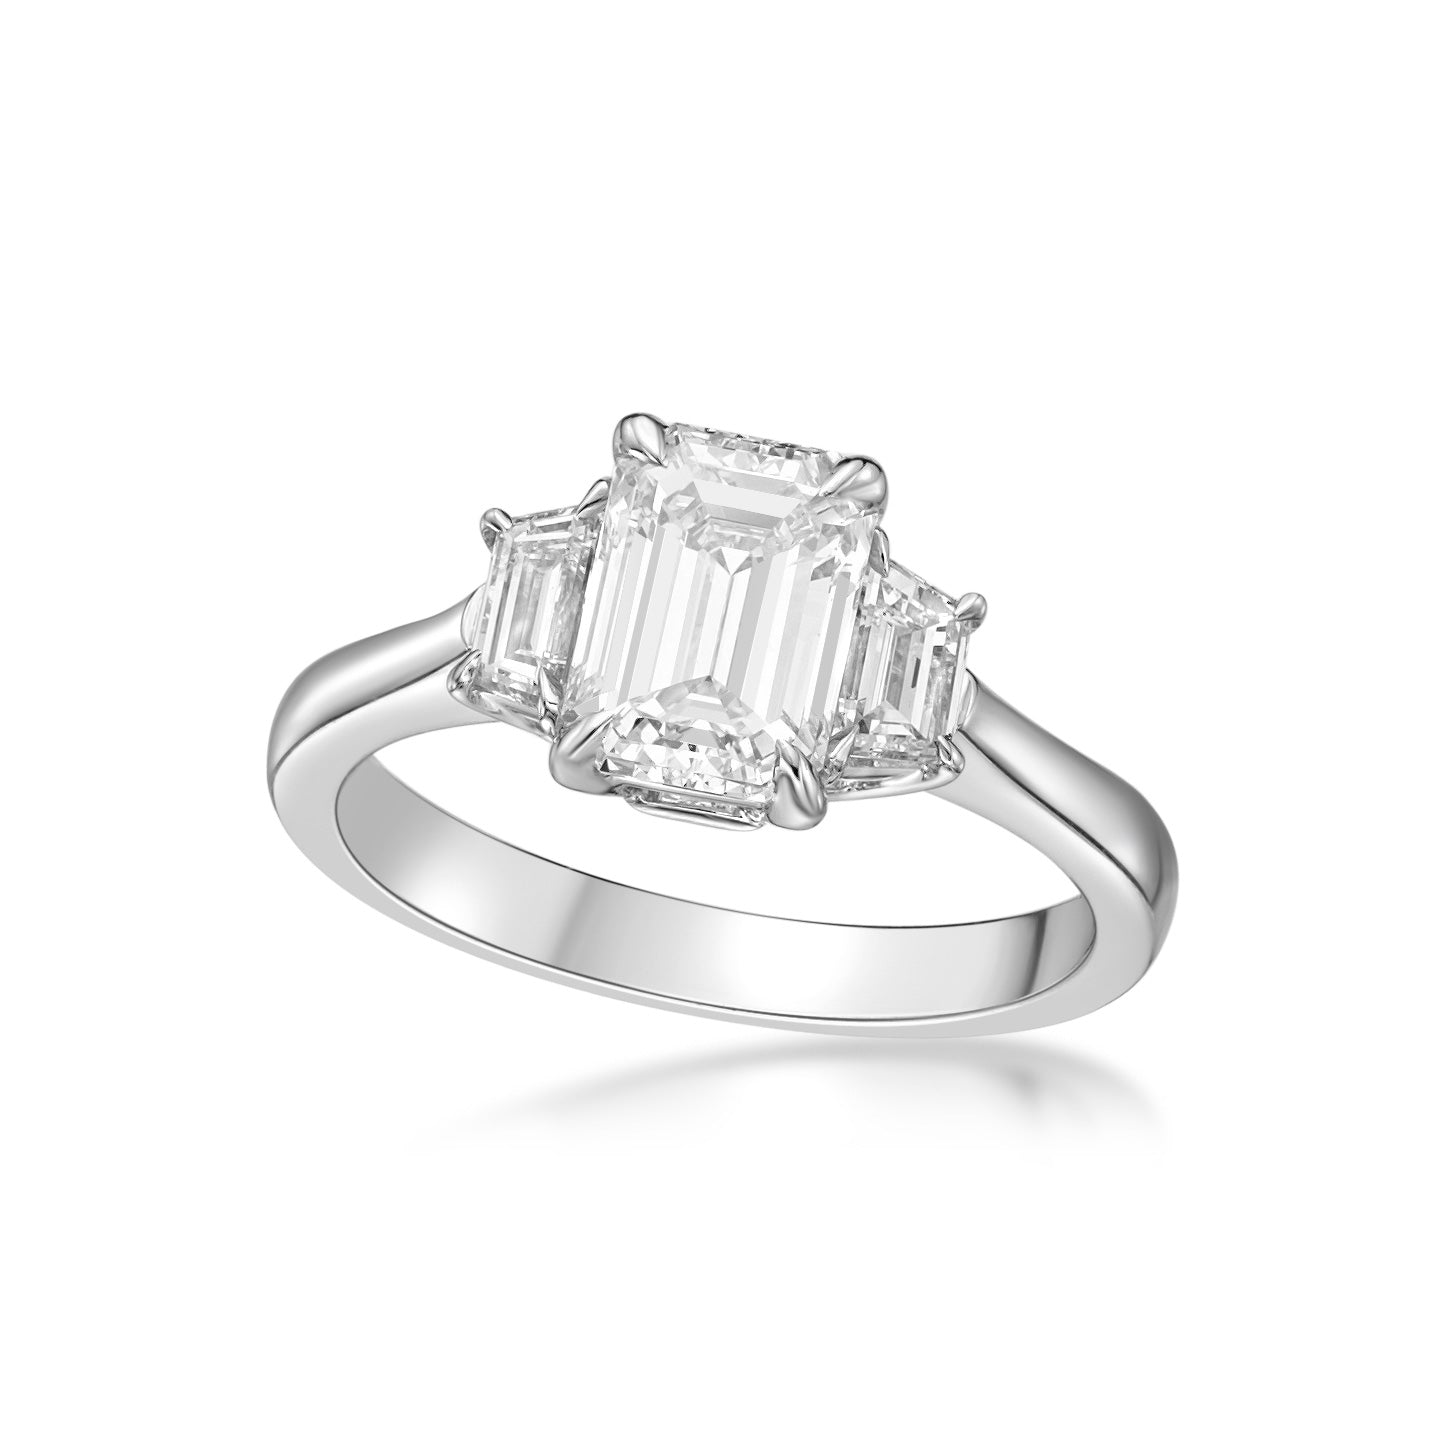 1.54ct Emerald cut diamond in an 18K White Gold engagement ring setting with Trapeze Diamond Sidestones